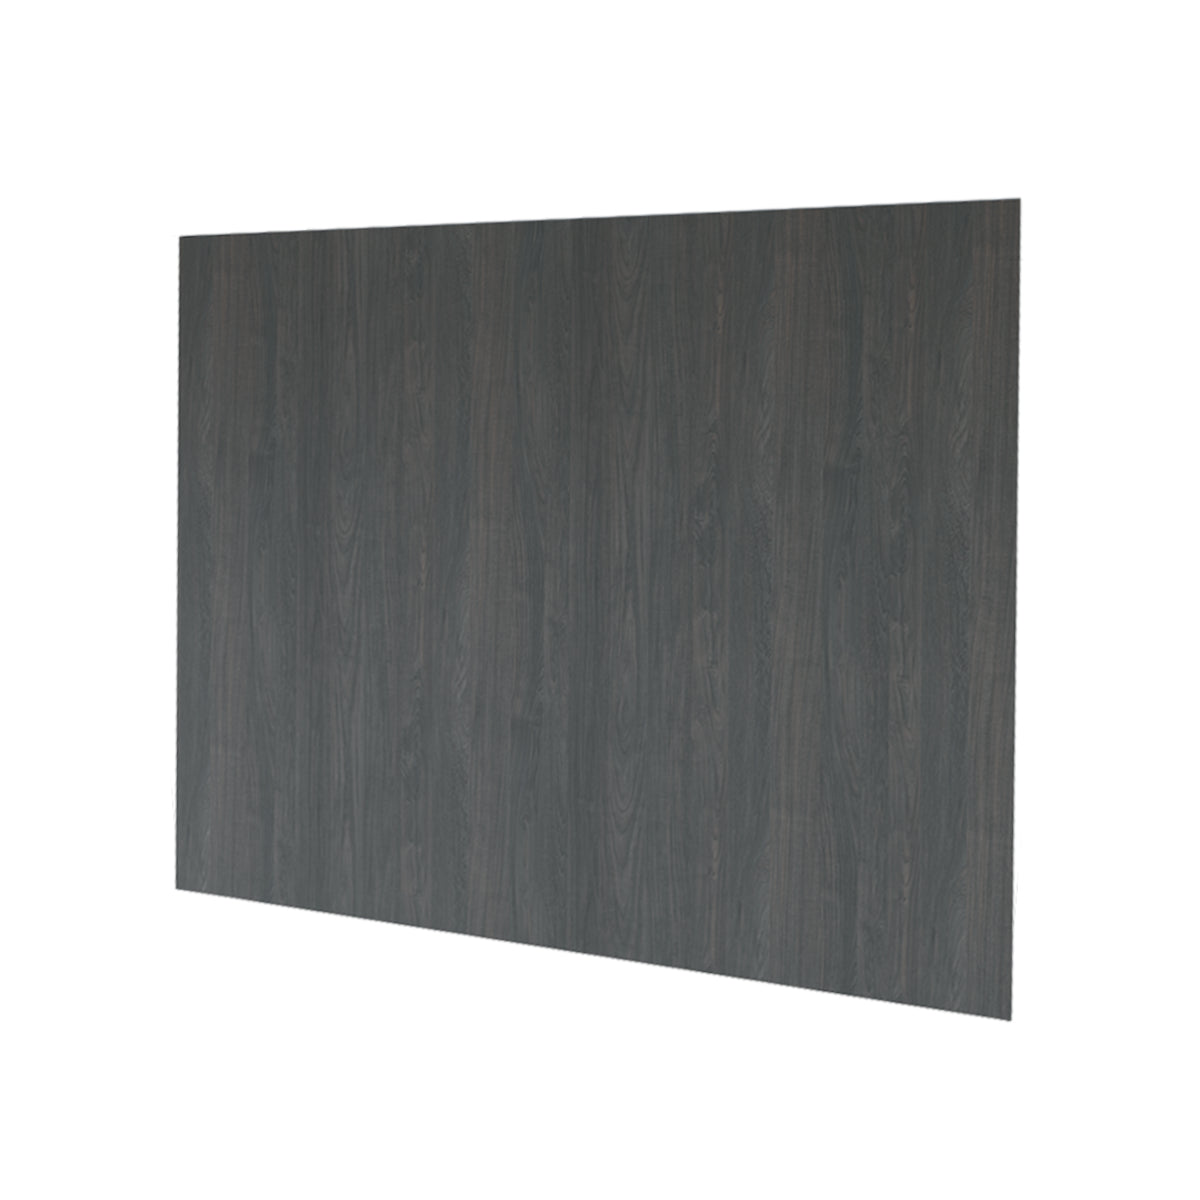 Carbon Marine Slab Style Kitchen Cabinet Island End Panel (36 in W x 0.75 in D x 48 in H)